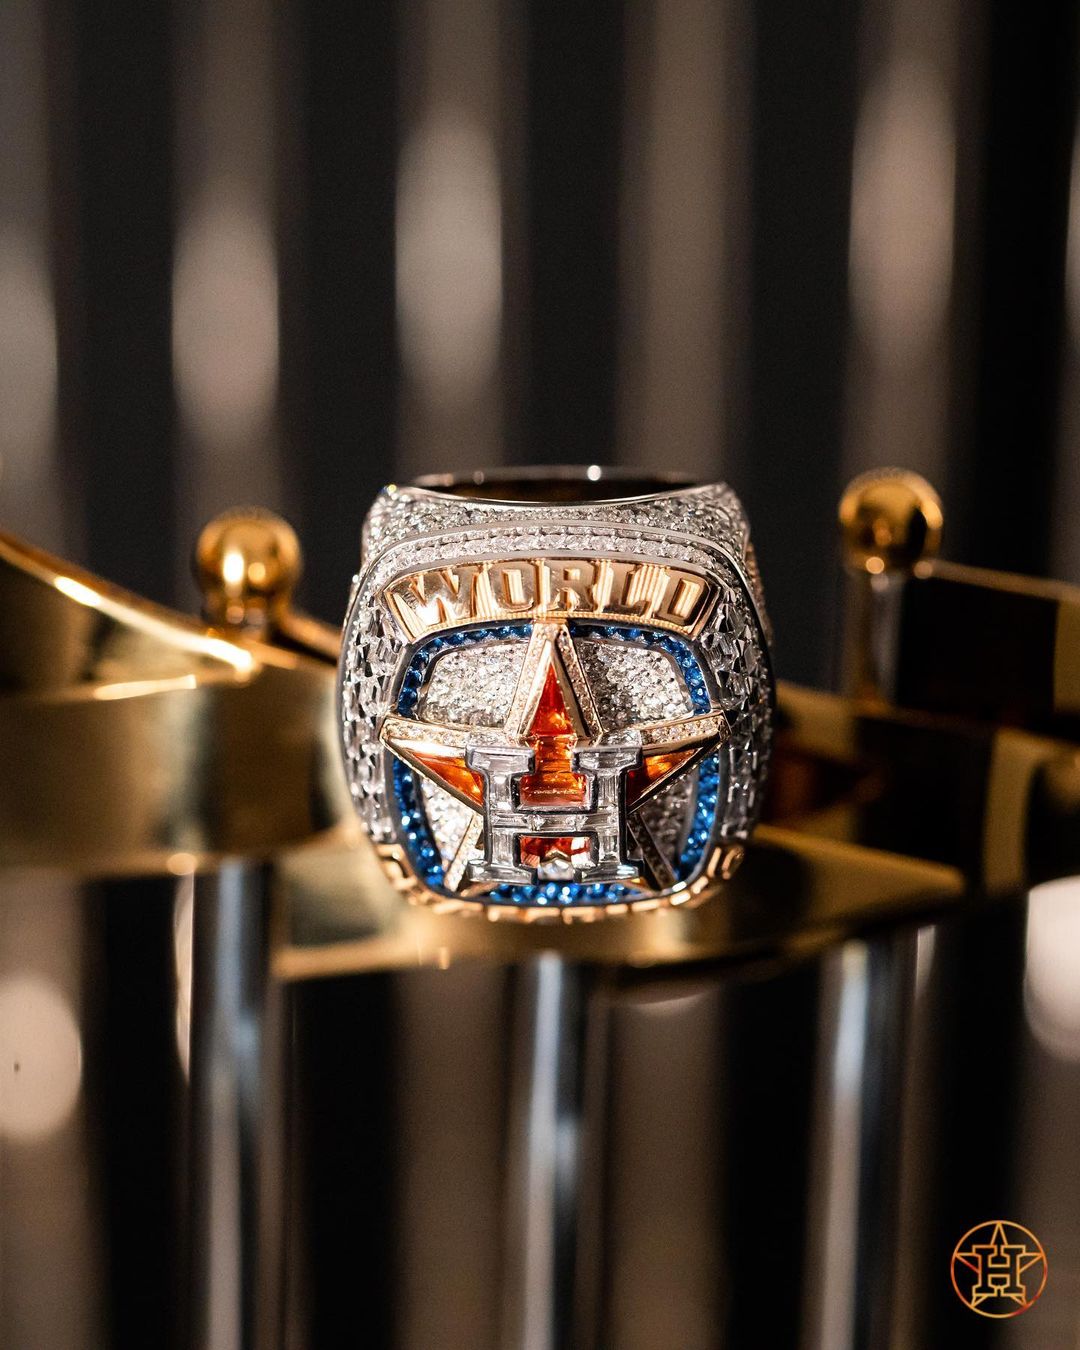 Official Houston astros world series trophy season 2022 champions